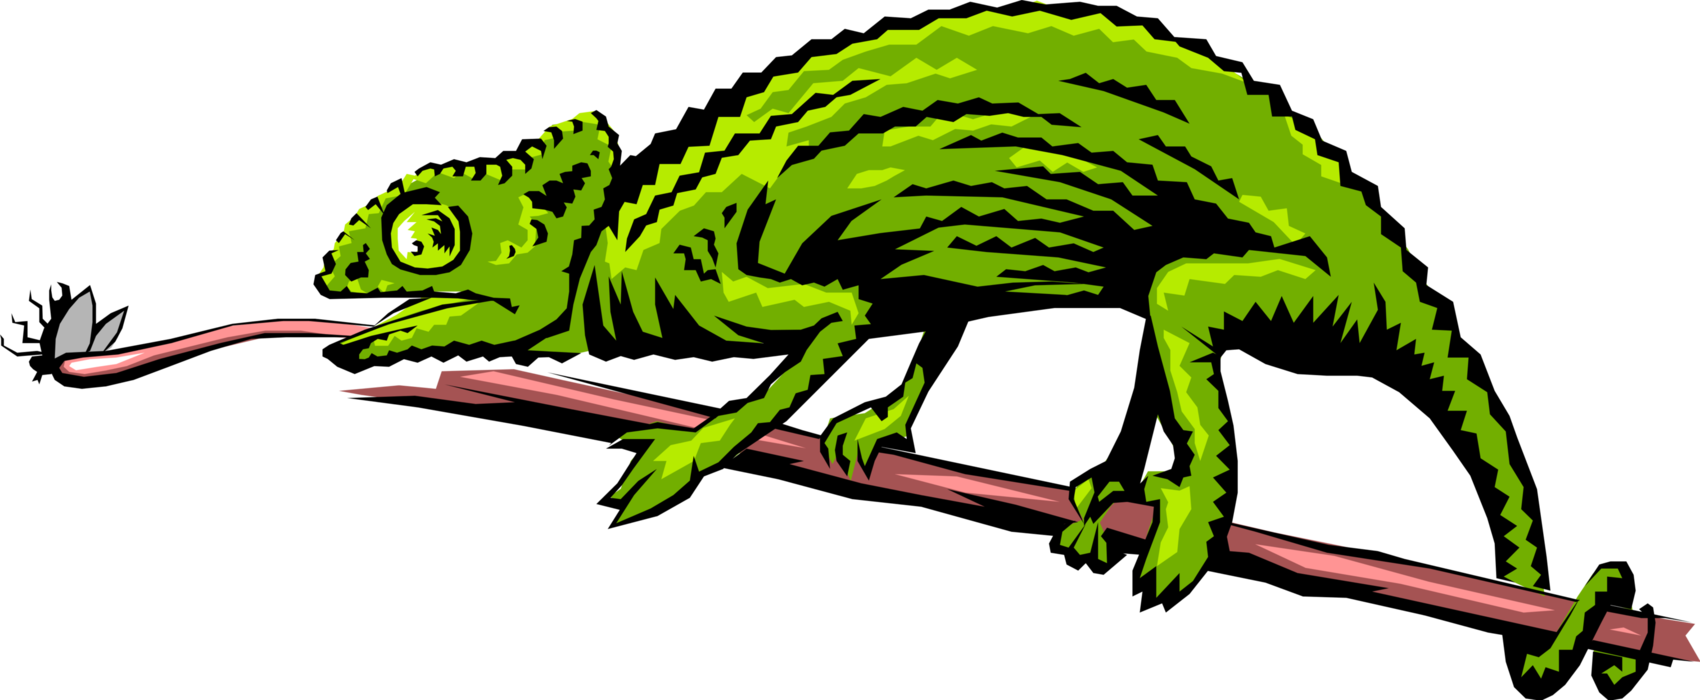 Vector Illustration of Chameleon Lizard Using Tongue to Catch Insect Meal